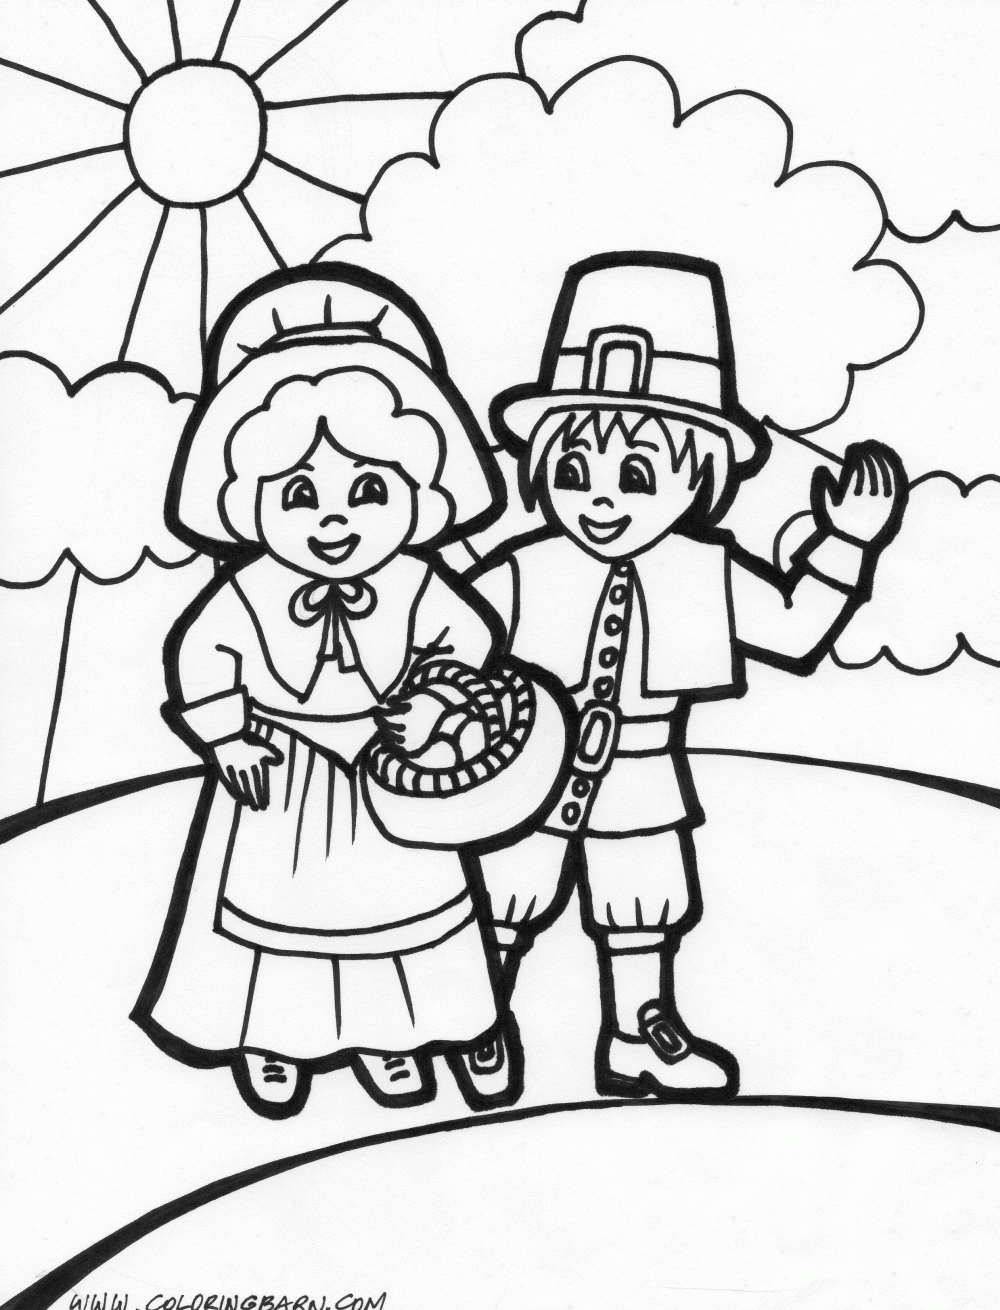 Printable Coloring Pages For Thanksgiving | Free Coloring Pages